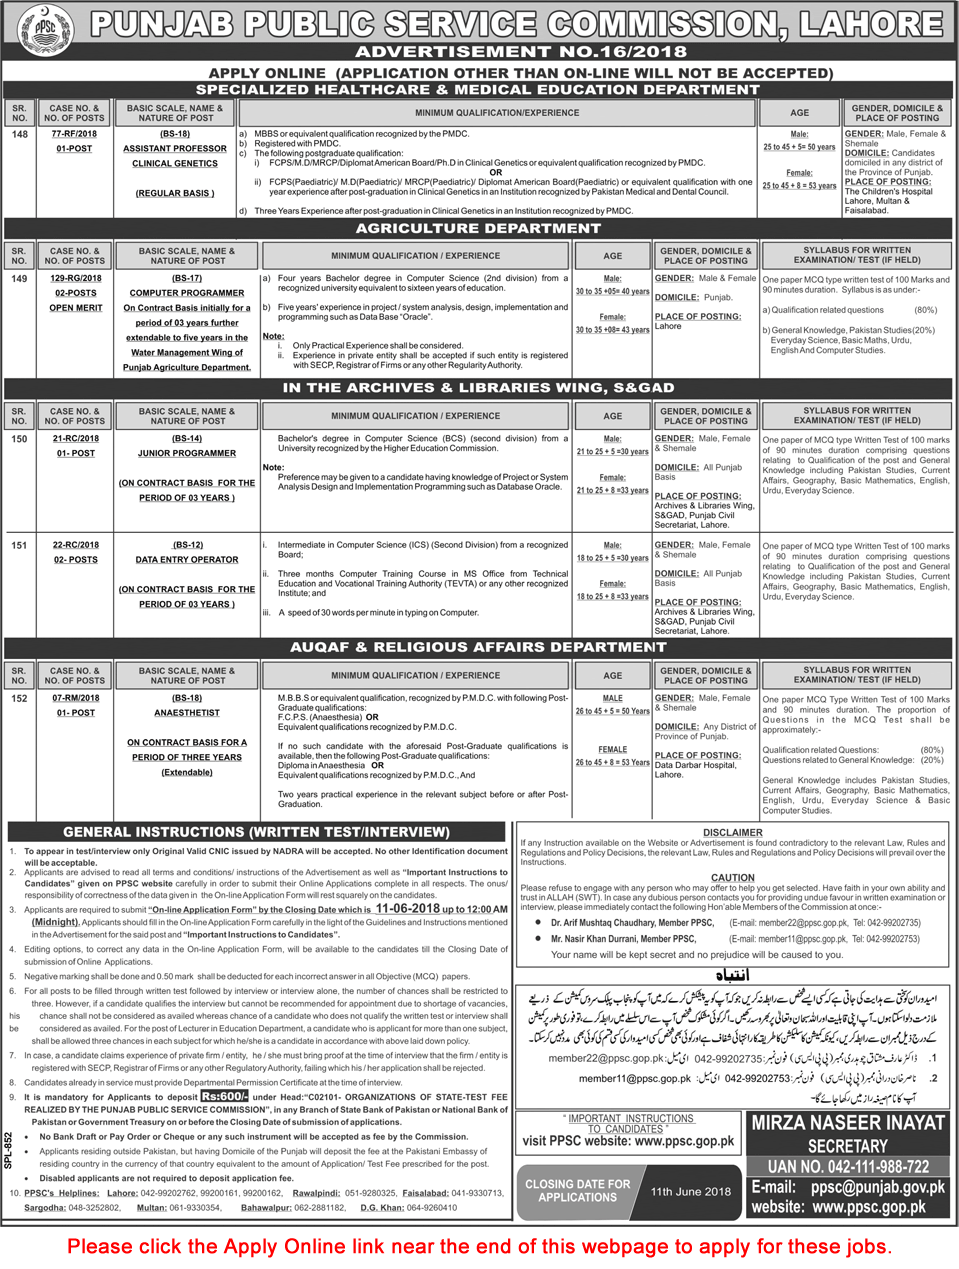 PPSC Jobs May 2018 Apply Online Consolidated Advertisement No 16/2018 Latest